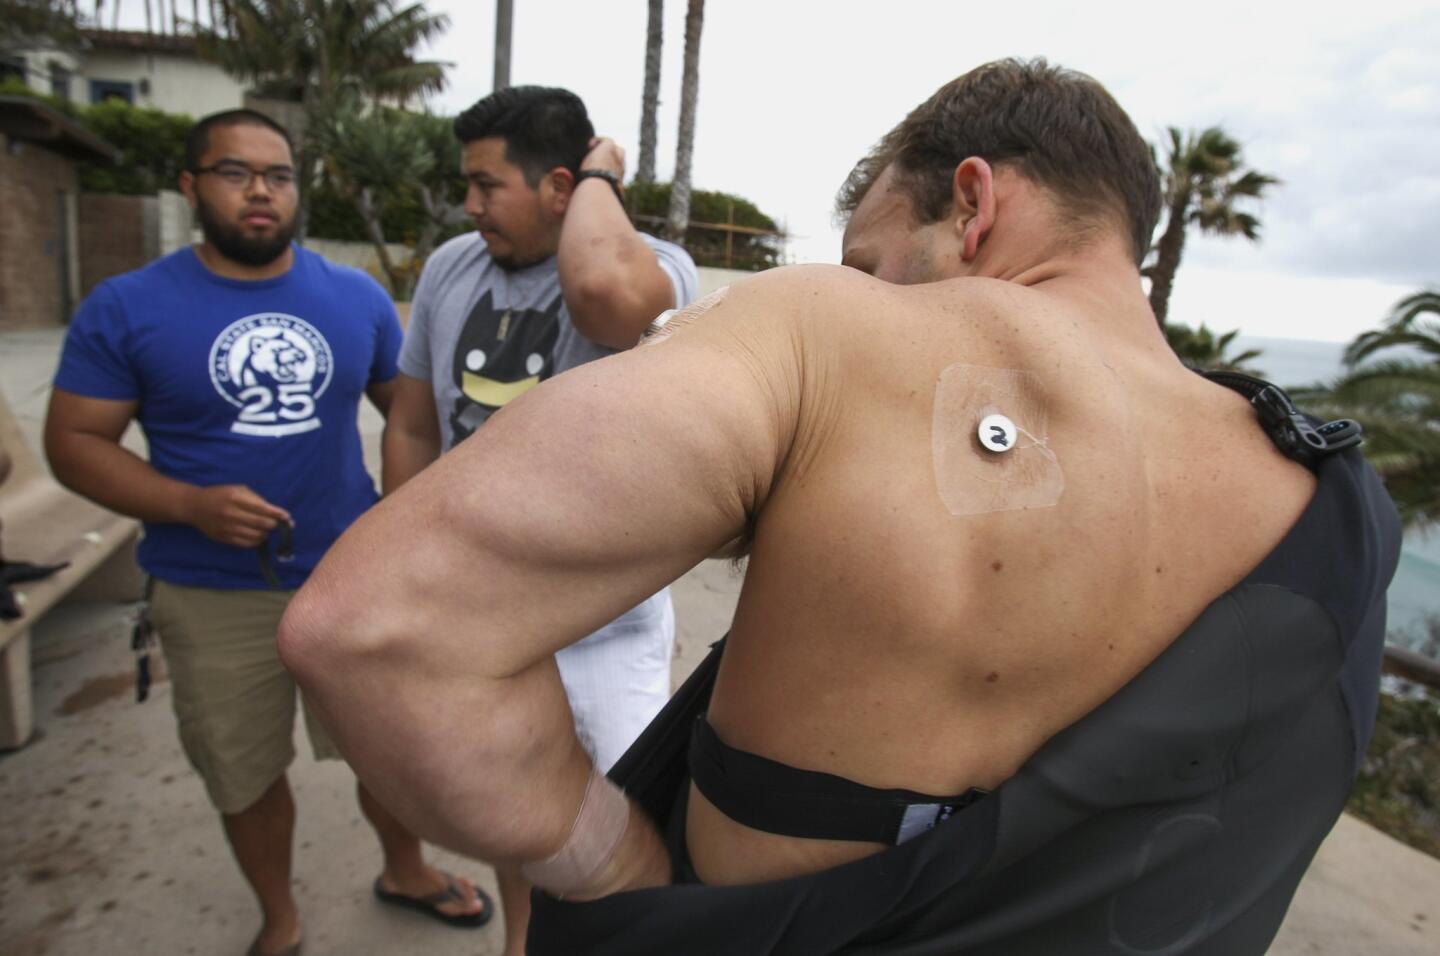 After CSUSM kinesiology students, including Alvin Padilla, 24, left, and Chris Zepeda, 24, center, placed eight skin sensors on him, surfer James Petracca, 27, puts on a Hurley wetsuit provided by the students.